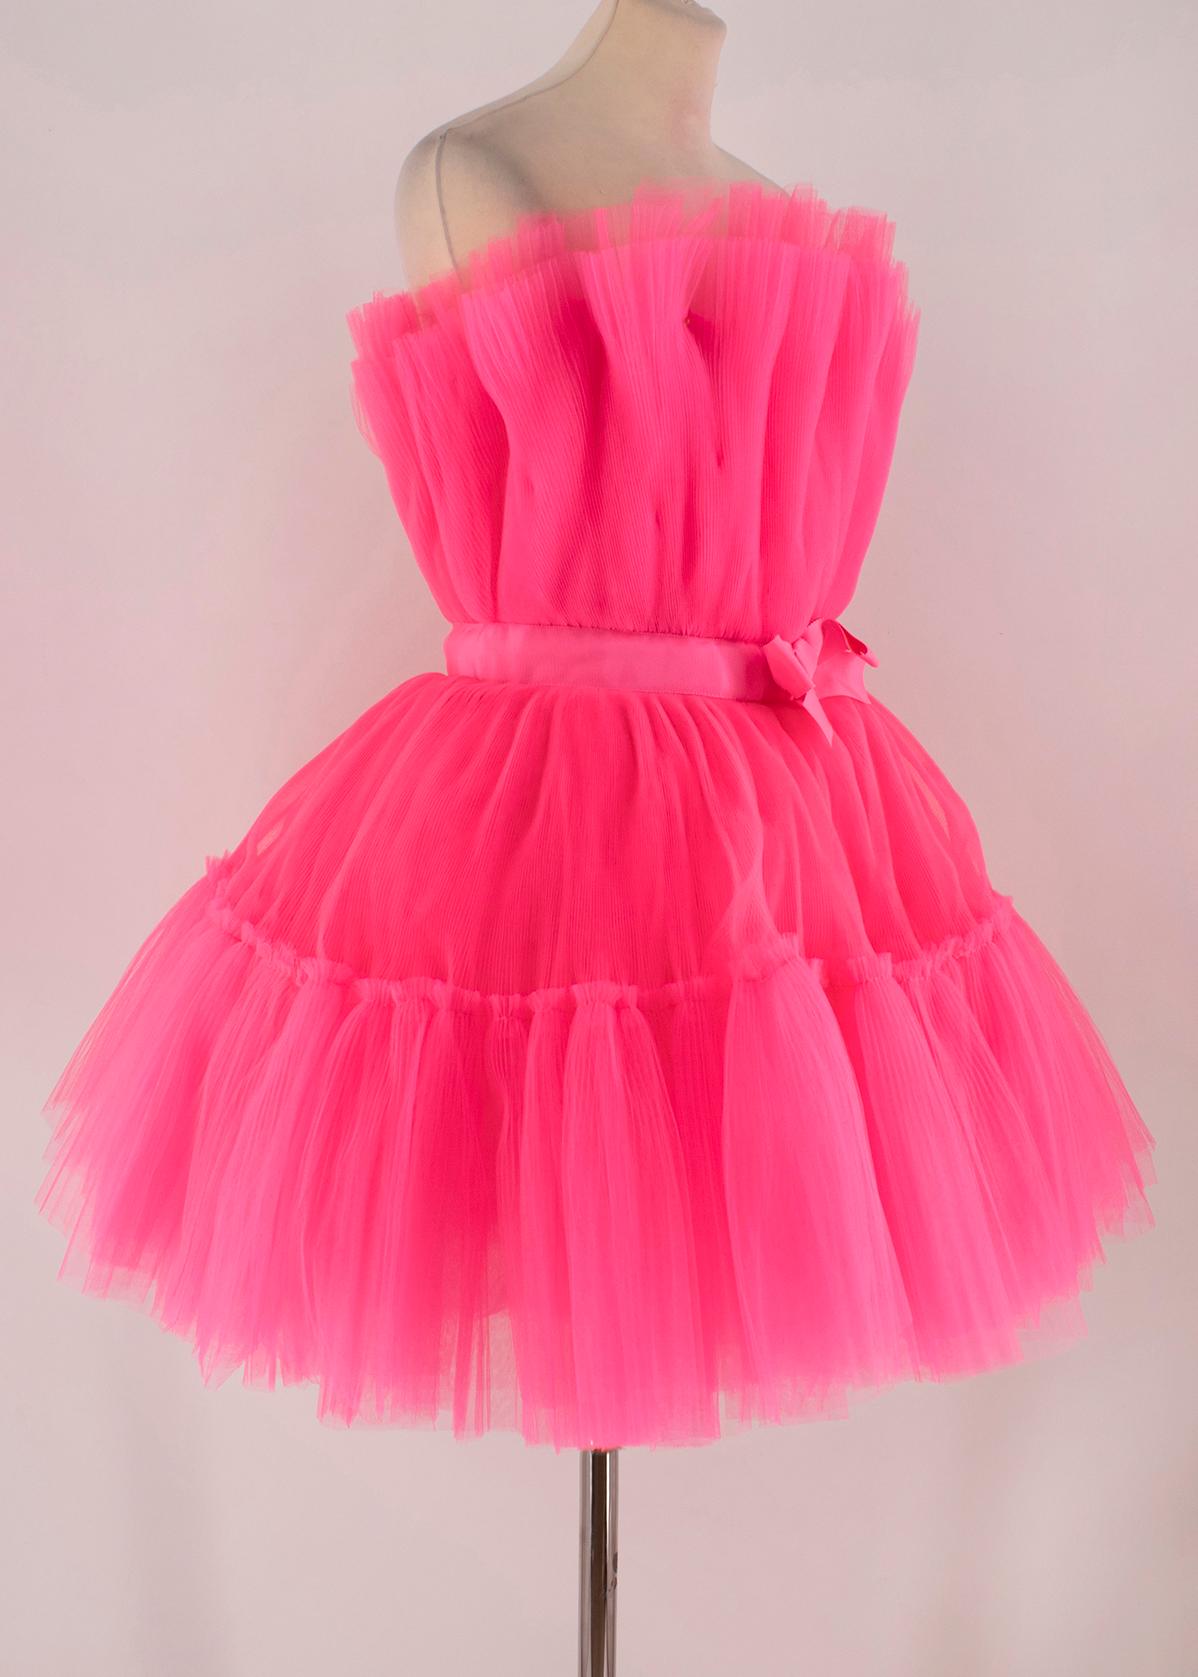 Giambattista Valli x H&M Pink Flared Tulle Dress

-Pink, tulle layered
-Strapless
-Bow detail and accent ribbon around waist
-Concealed hook and fasten closure 
-Concealed zip closure 
-Lined

Please note, these items are pre-owned and may show some